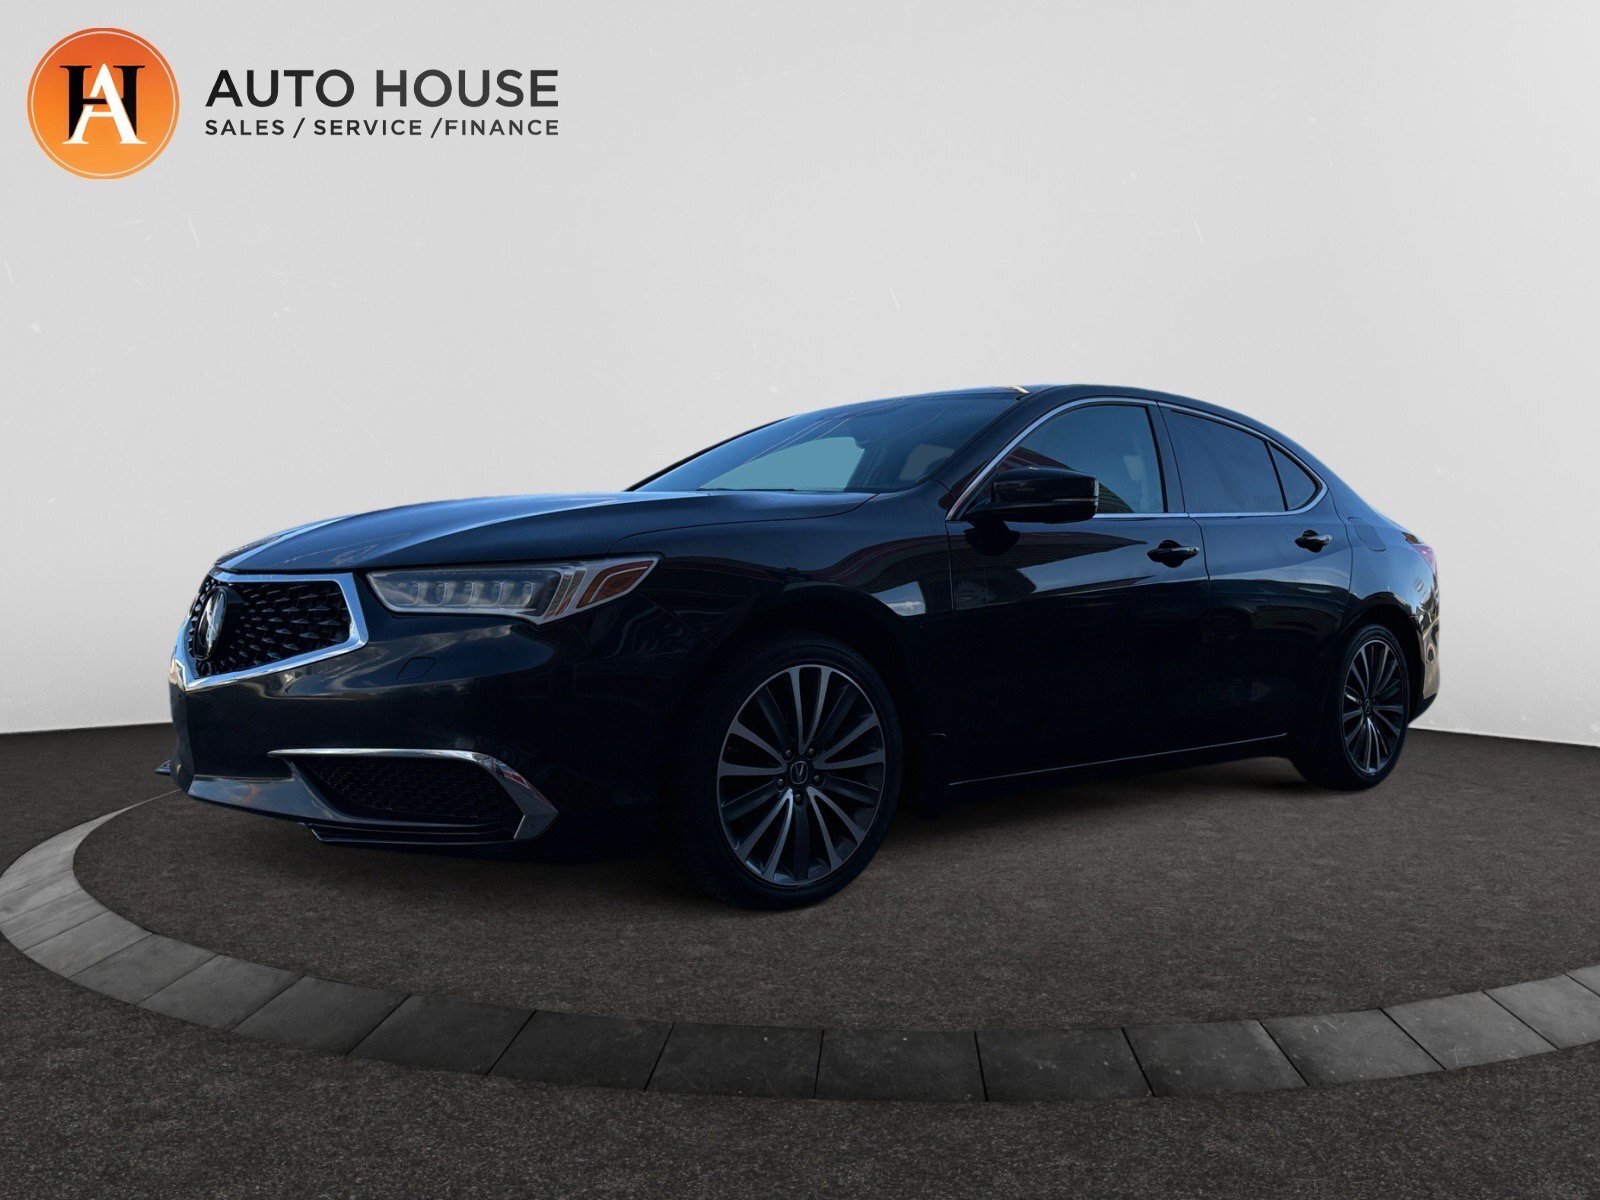 2018 Acura TLX TECH PACKAGE LEATHER NAVIGATION BCAMERA AWD